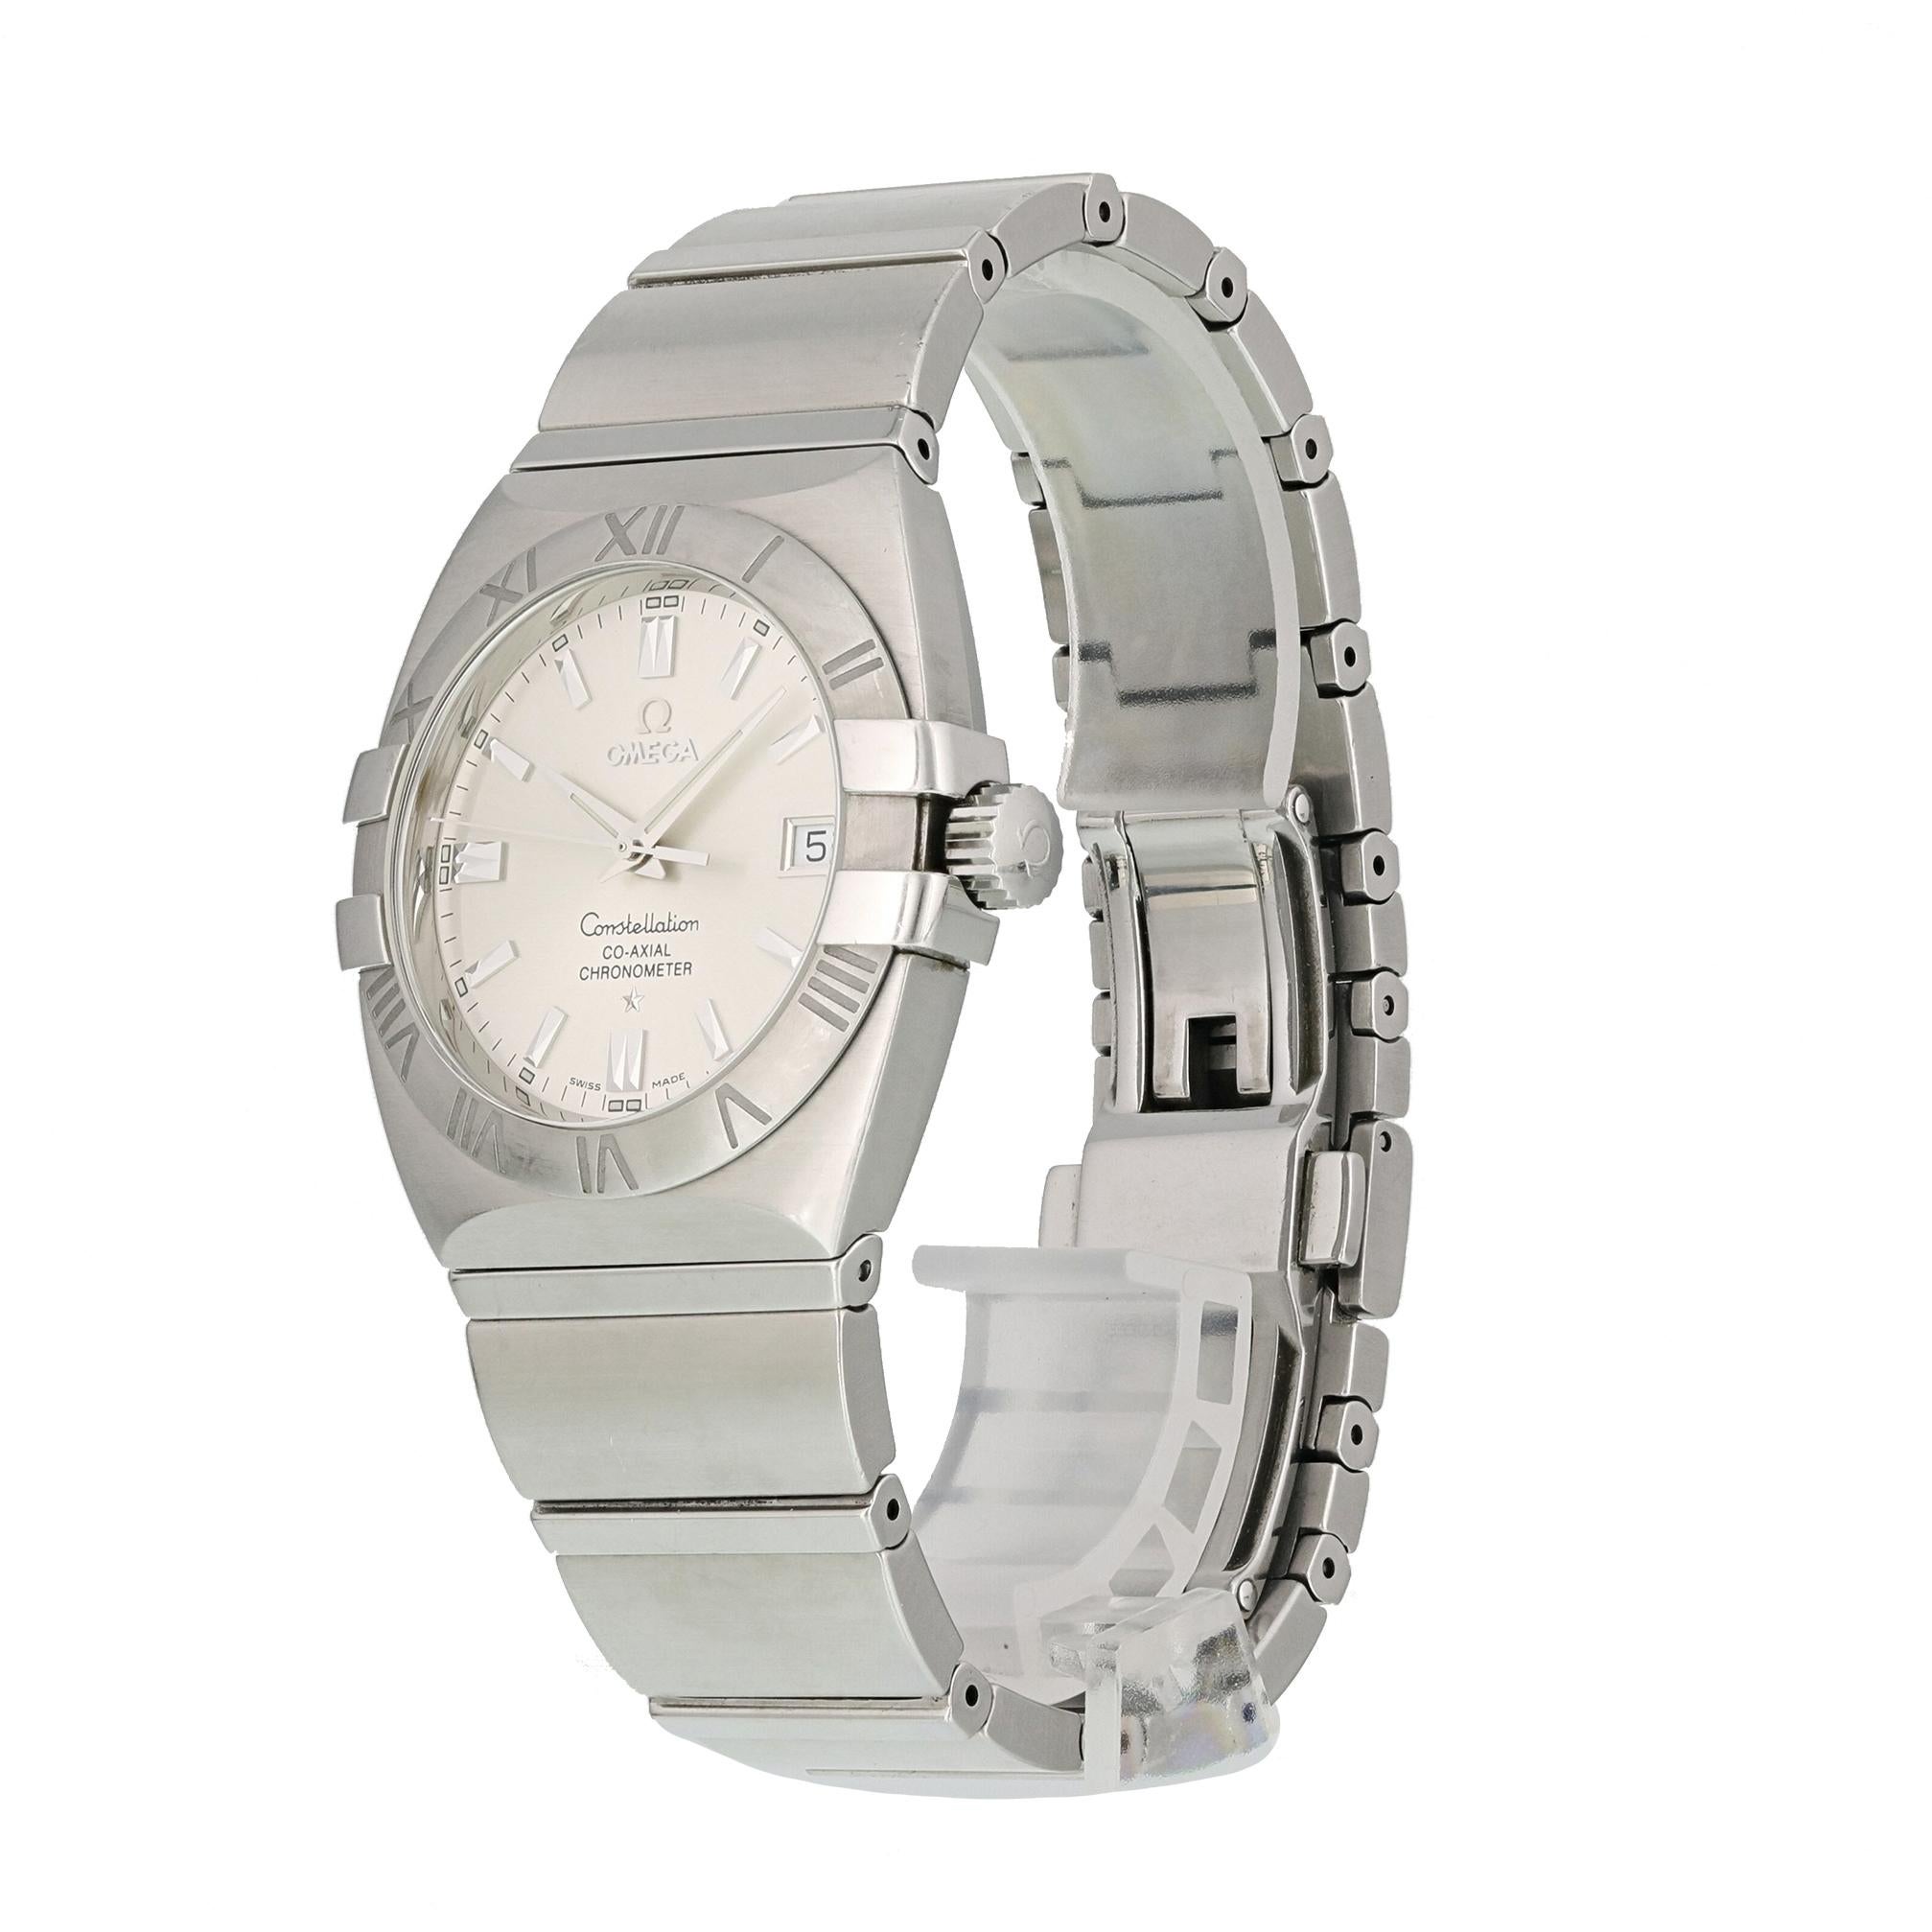 Omega Constellation Double Eagle 1213.30.00 Co-axial Men Watch.
38mm Stainless Steel case. 
Stainless Steel bezel. 
Silver dial with Luminous gold hands and index hour markers. 
Minute markers on the outer dial. 
Date display at the 3 o'clock